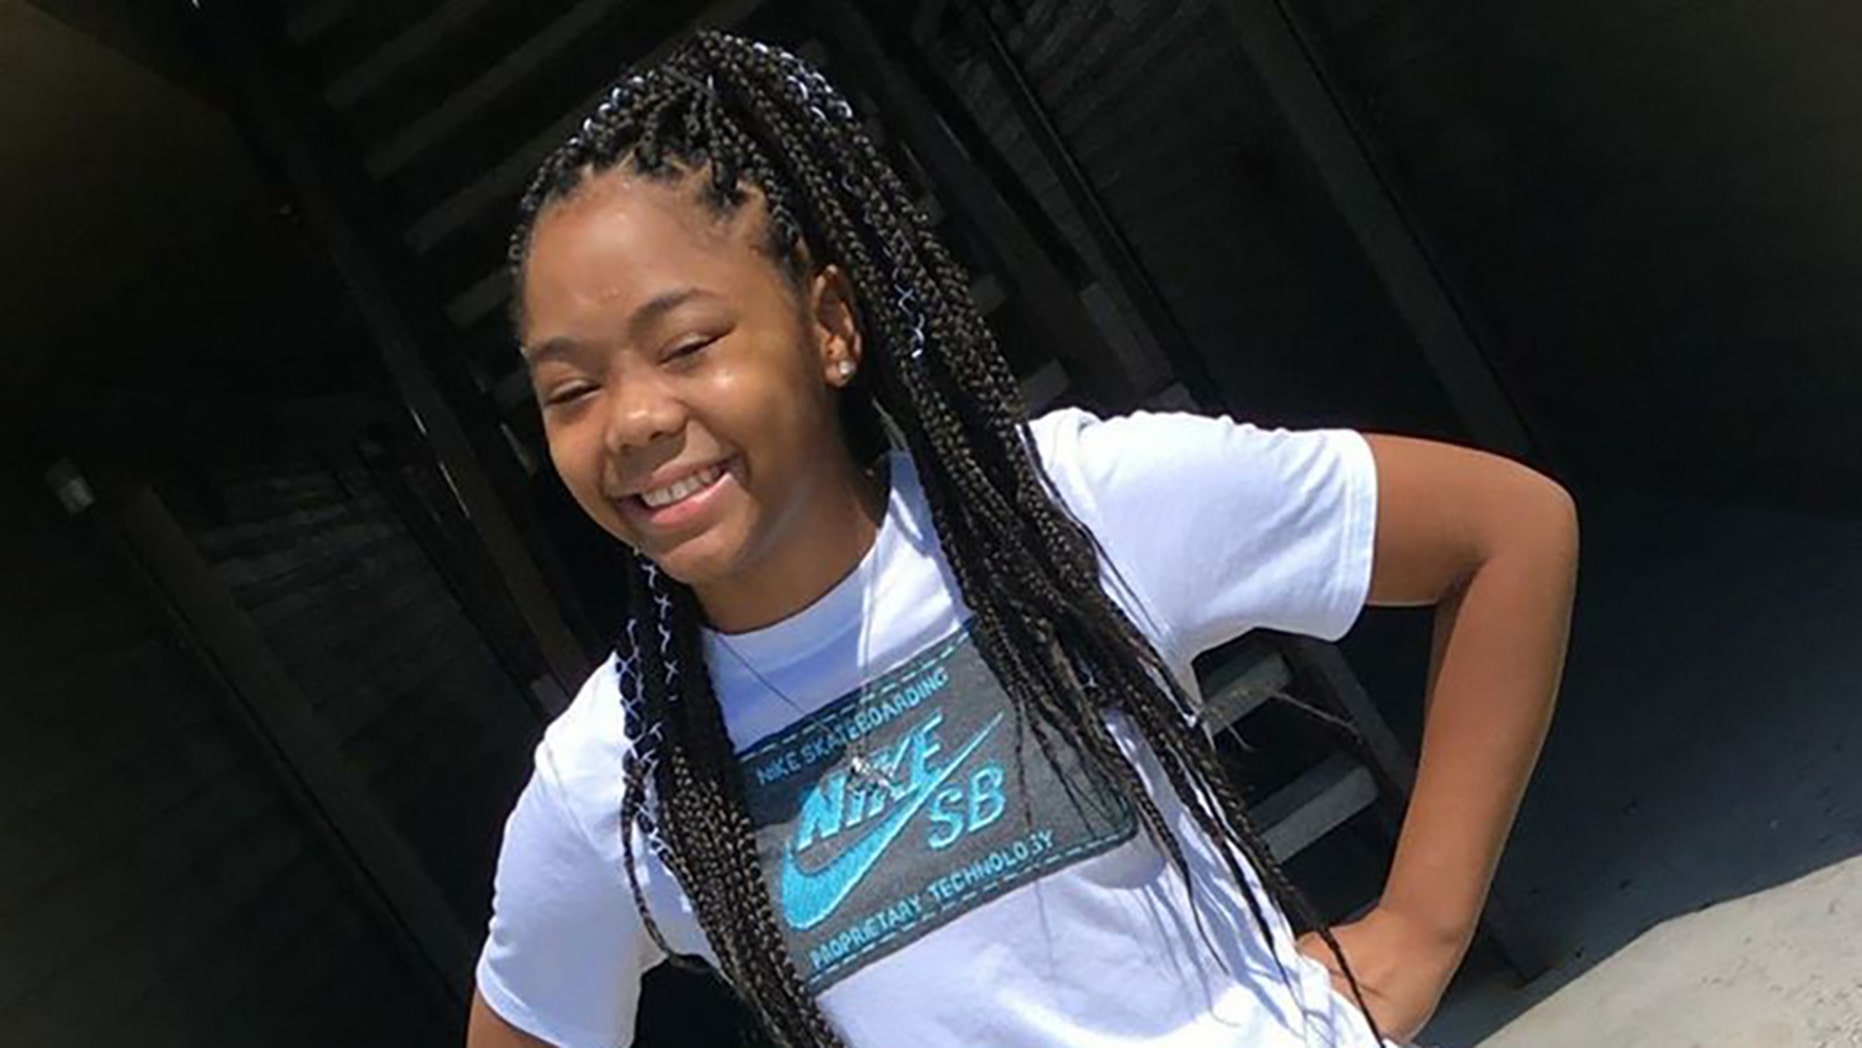 Kashala Francis, a seventh grade student, died in intensive care five days after classmates allegedly beat her and kicked her in the head as she walked home from home. l & # 39; school.